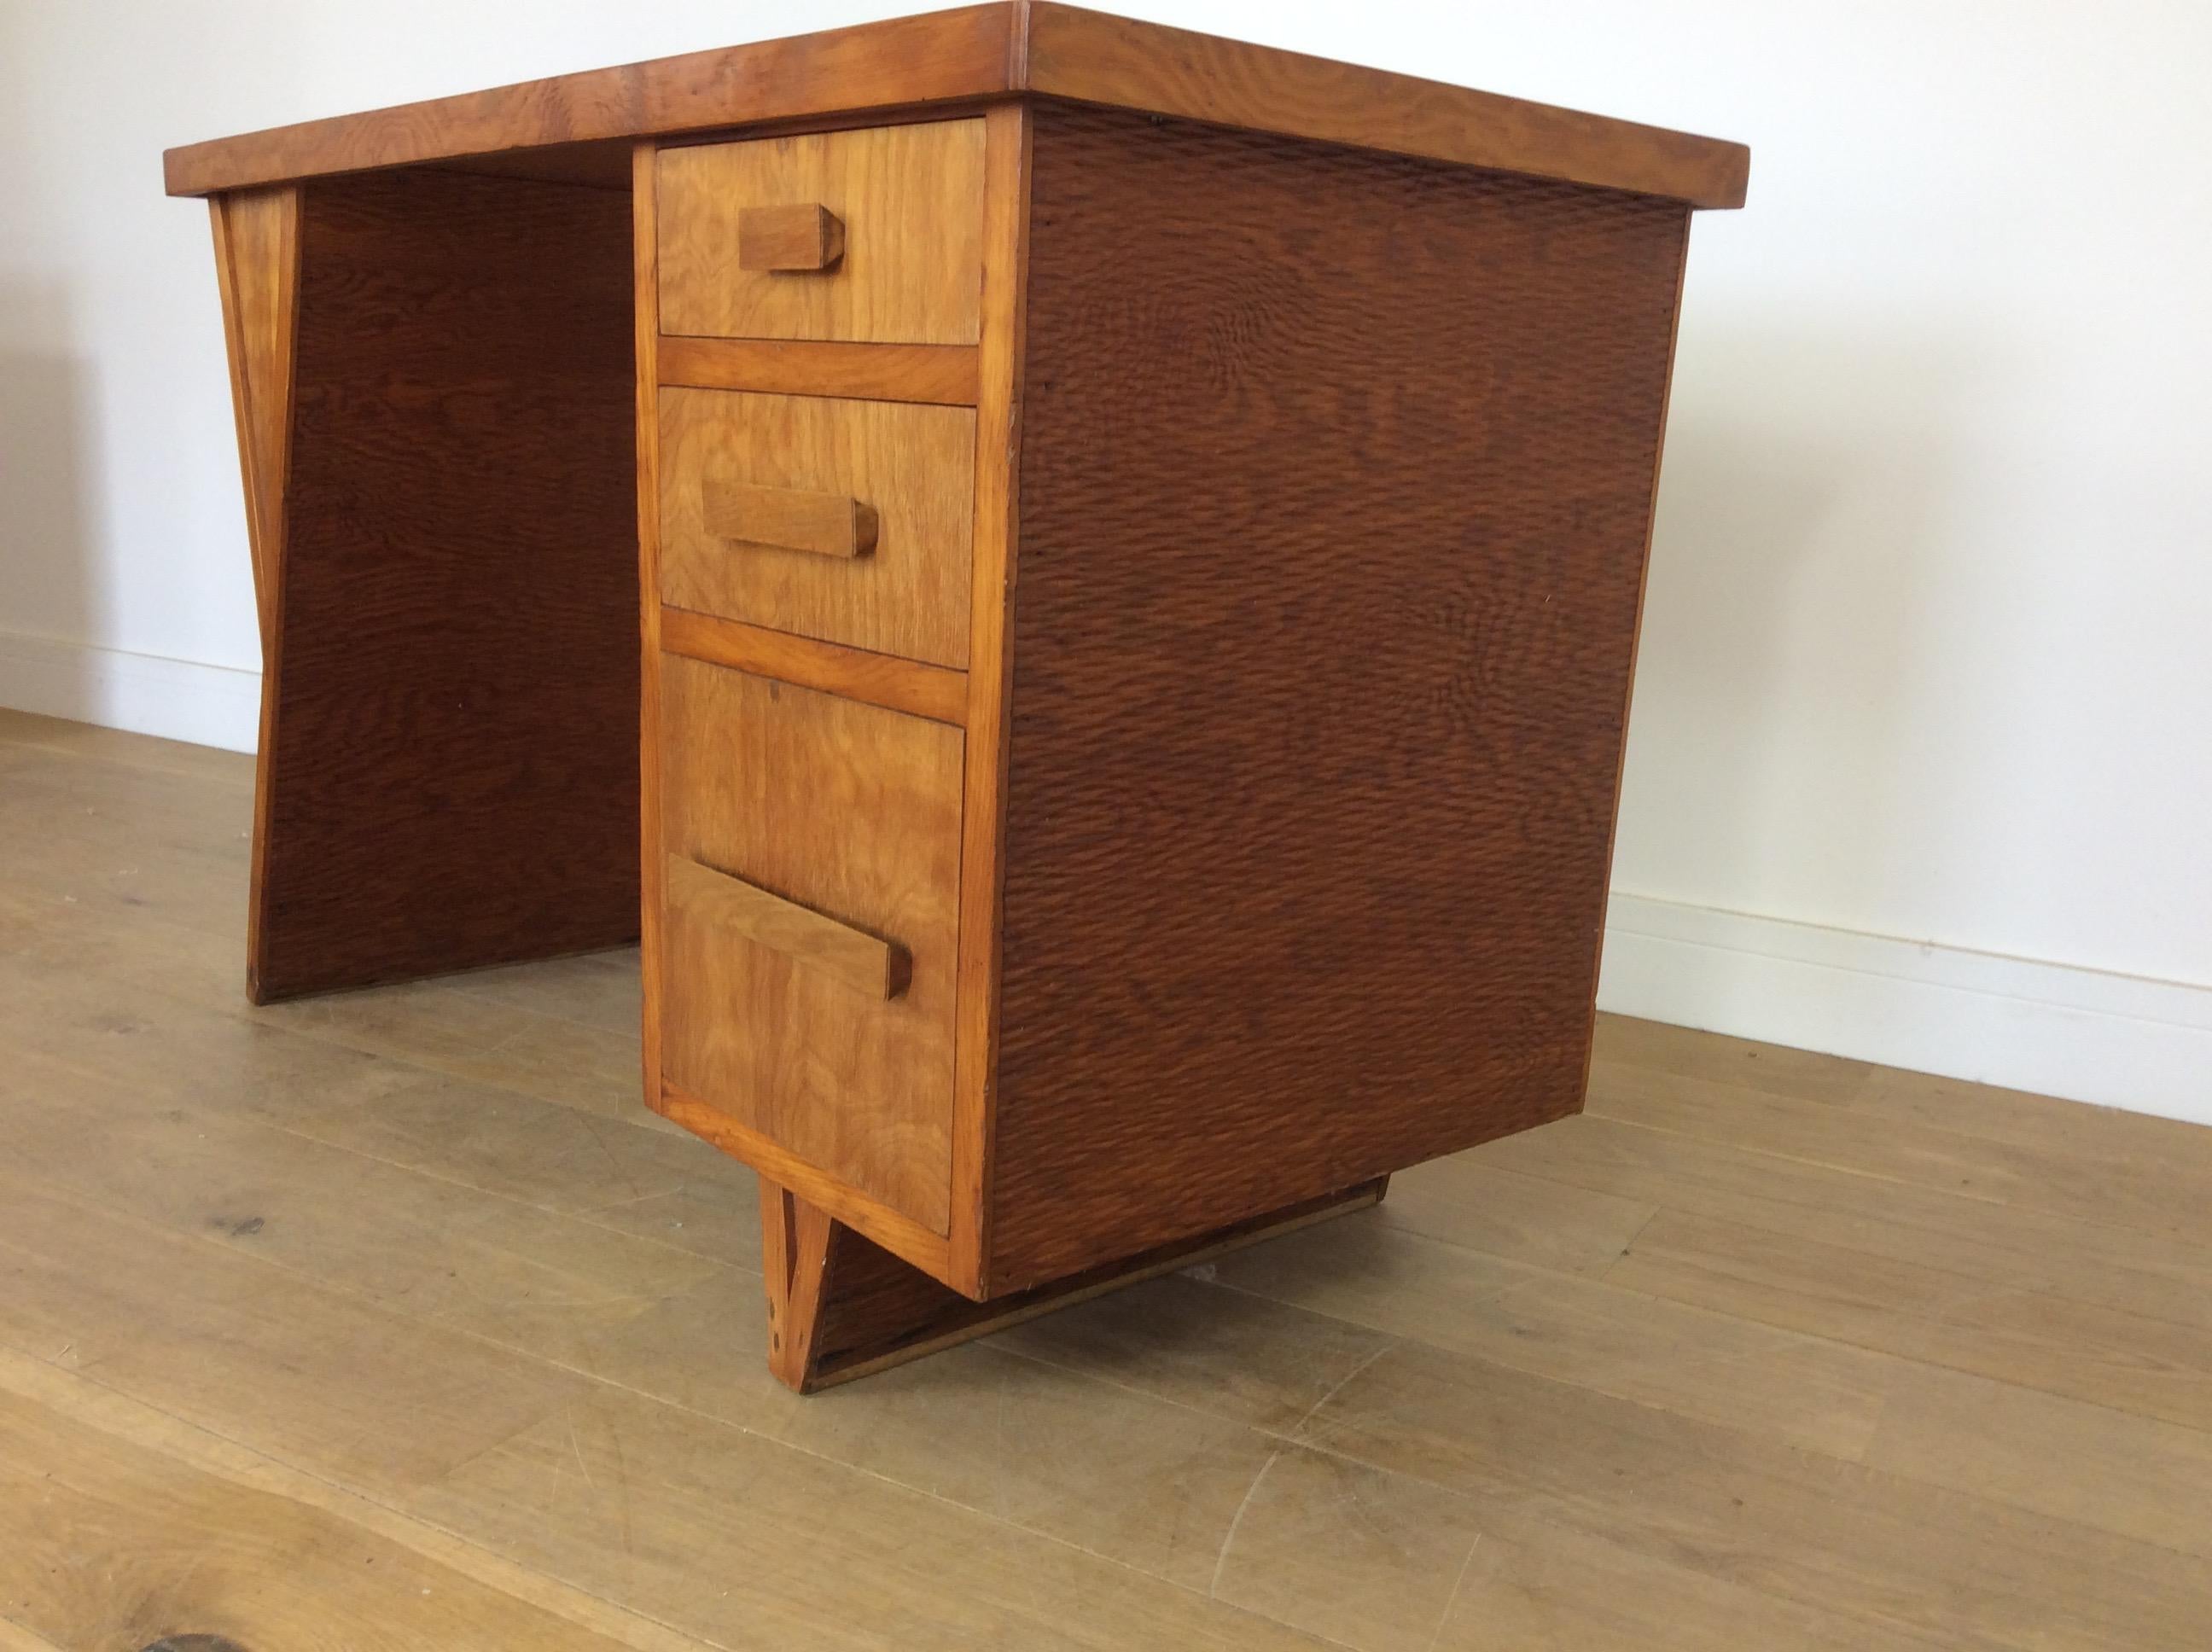 Rare Midcentury Ply Desk In Good Condition For Sale In London, GB